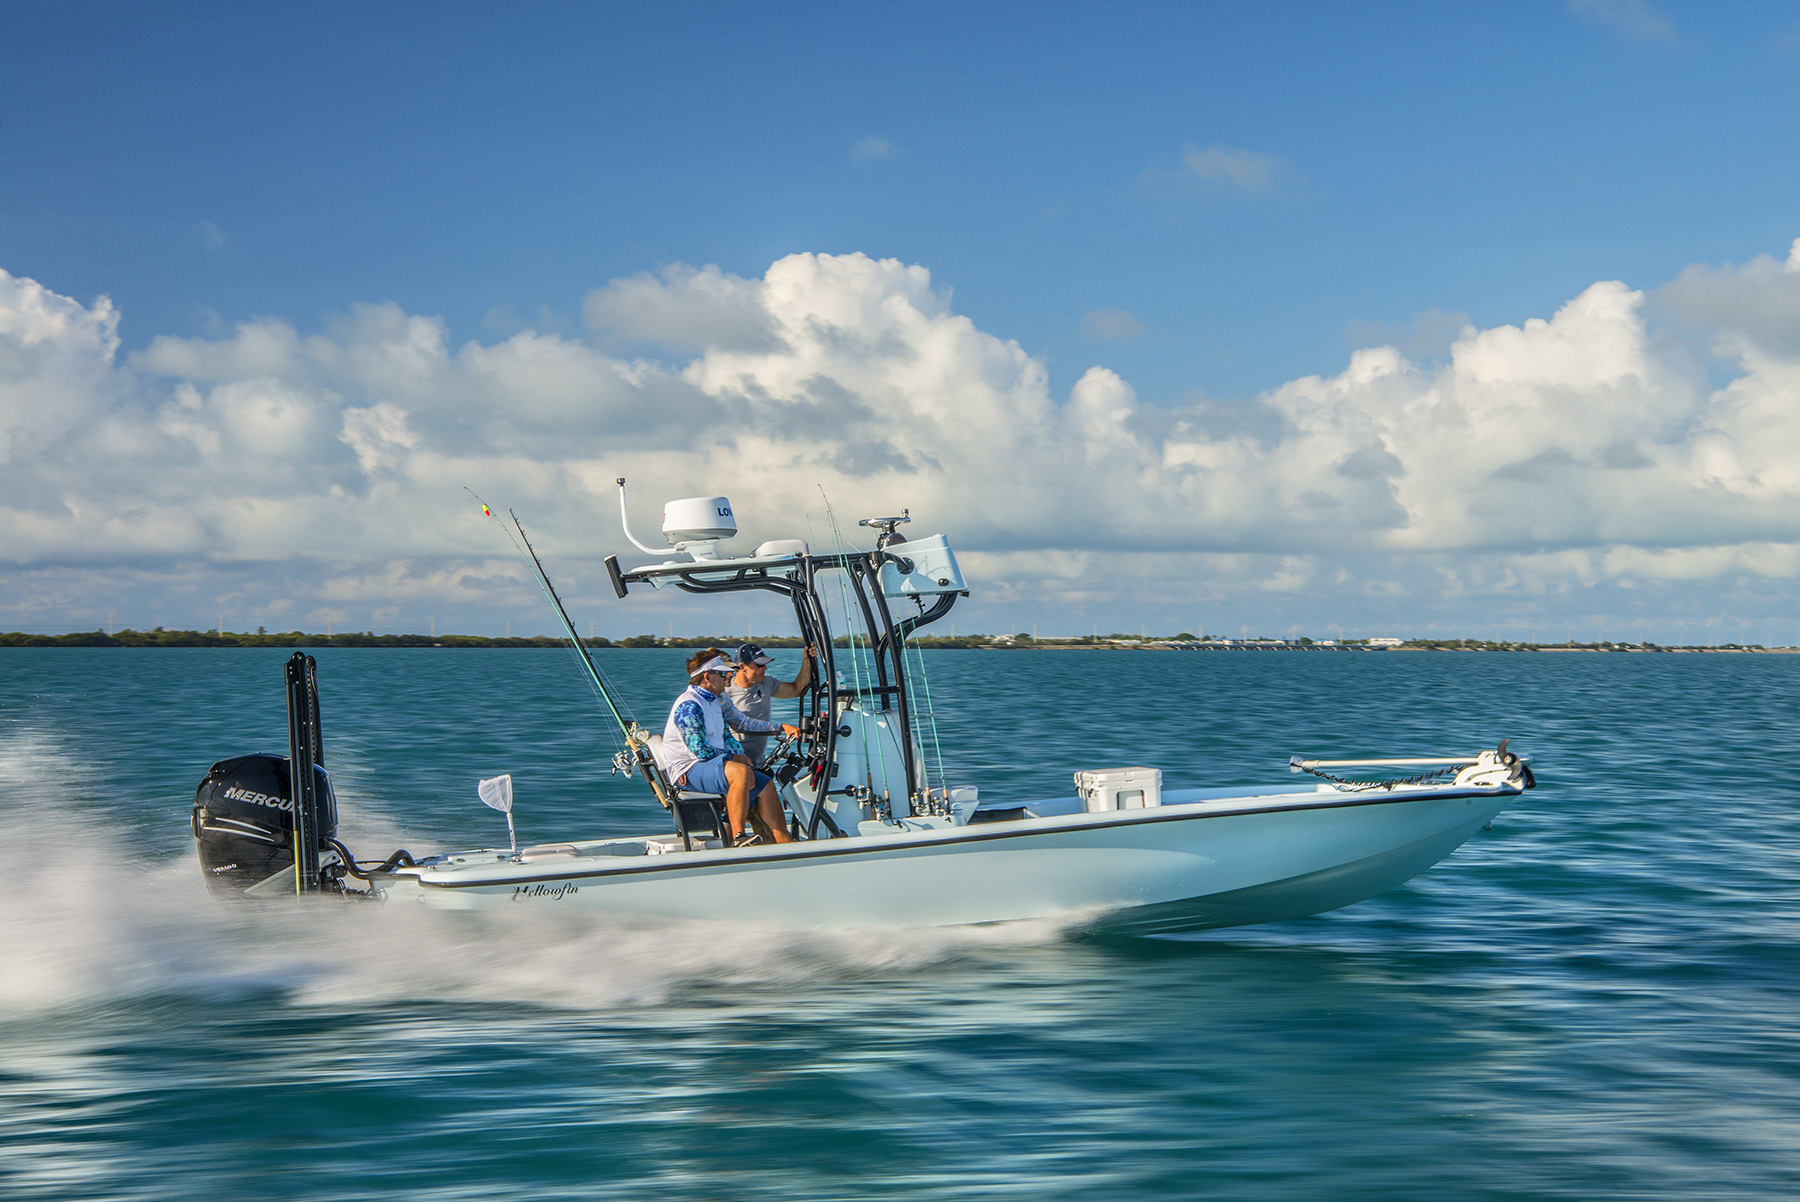 Saltwater Experience - New boat, same attention to detail for